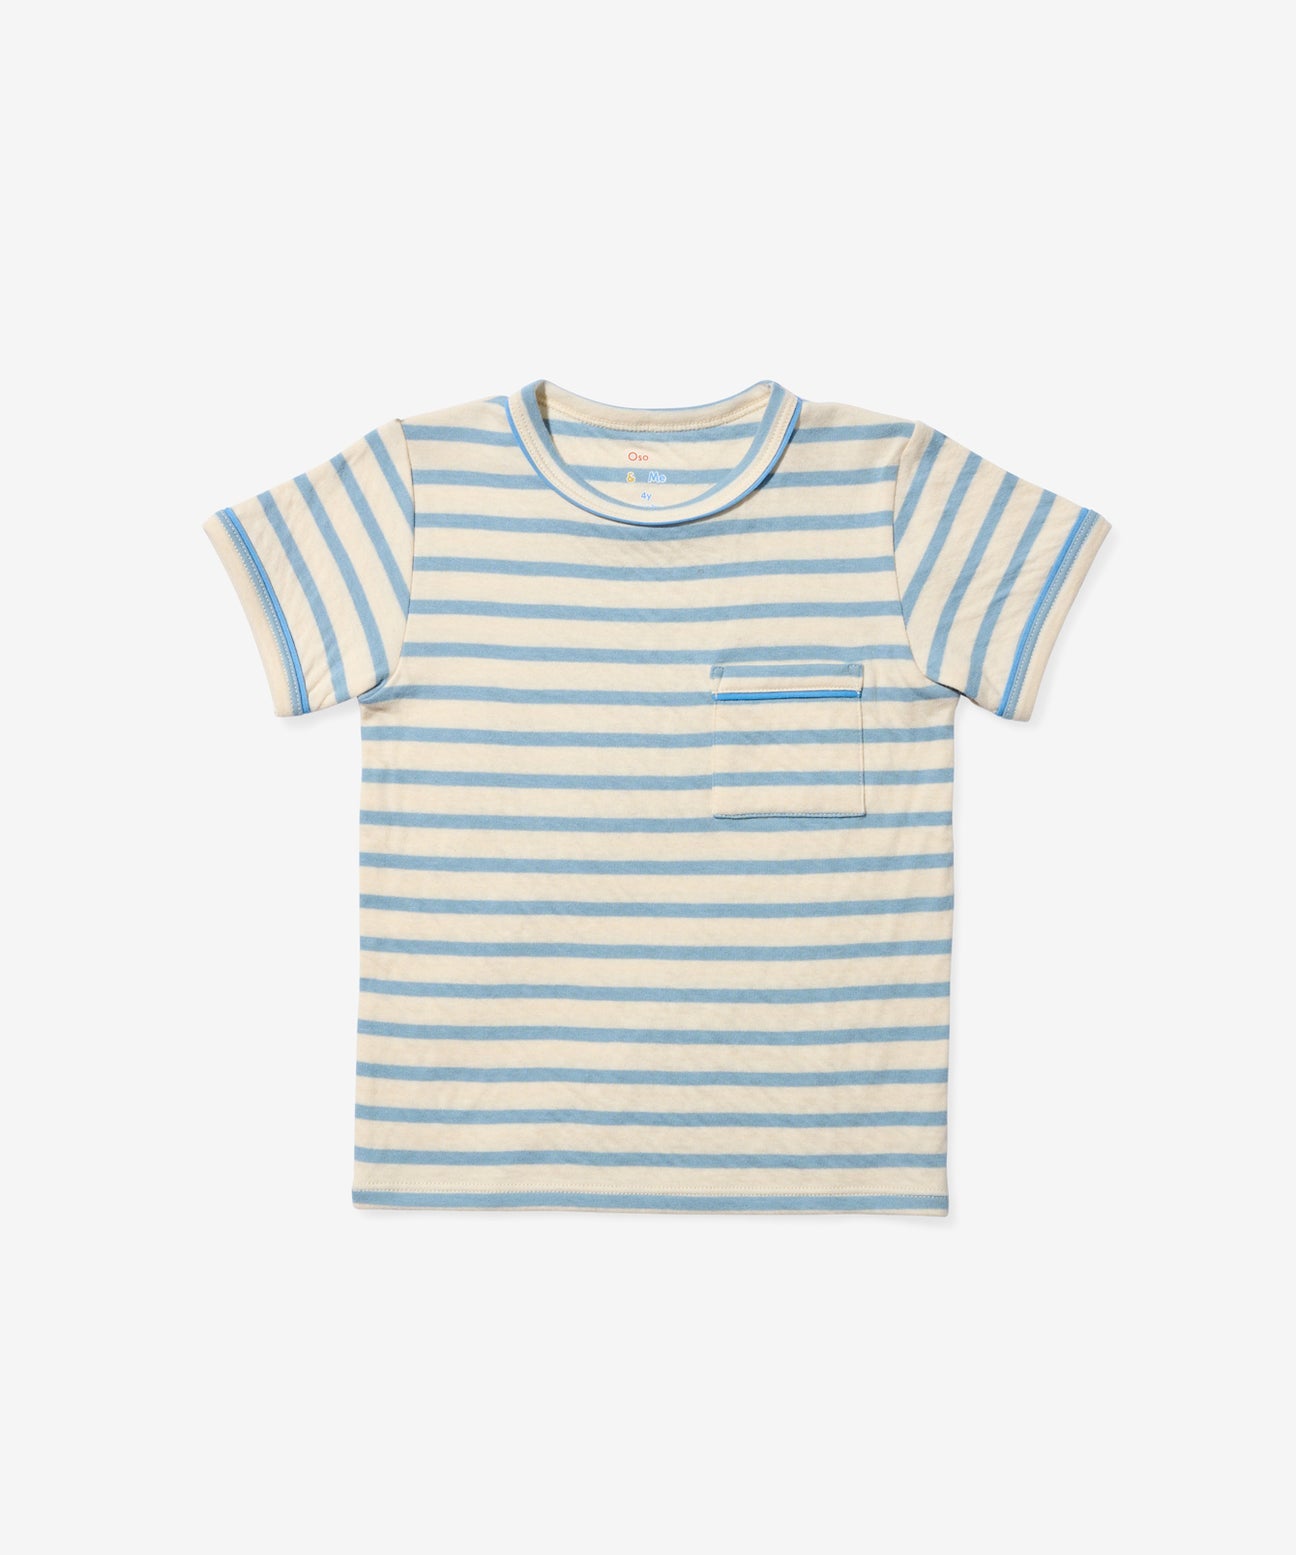 Oso and Me Willie T-Shirt in Dusty Blue Stripe